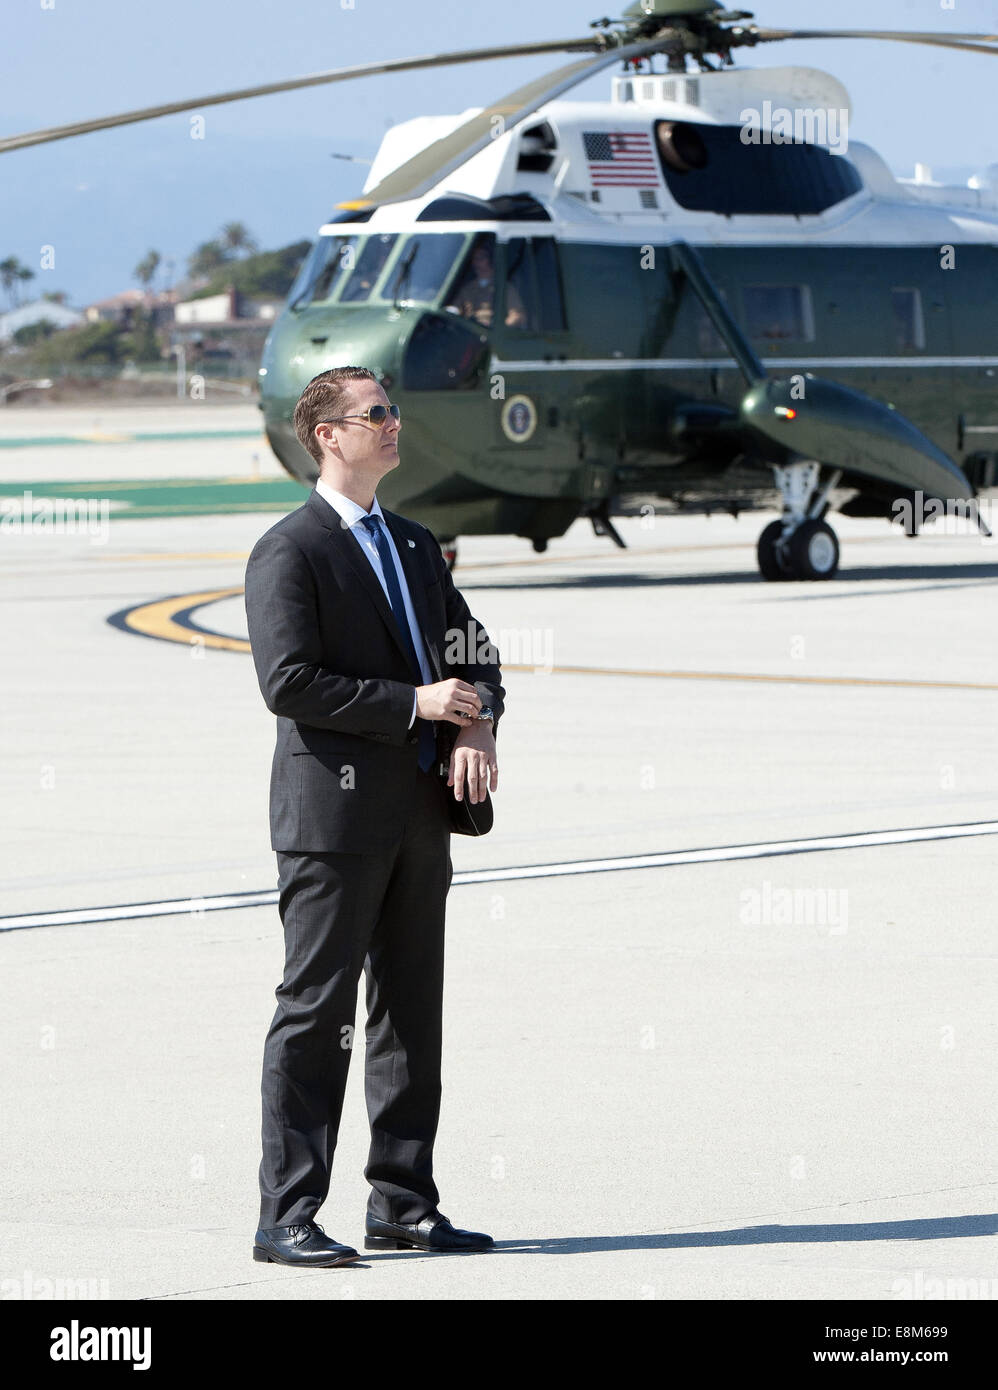 Los Angeles, California, USA. 9th Oct, 2014. A US Secret Service Agent stands by on the tarmac at LAX alongside what will be Marine One as he waits for the imminent arrival of Air Force One carrying President Barack Obama on Thursday October 9, 2014. Credit:  David Bro/ZUMA Wire/Alamy Live News Stock Photo